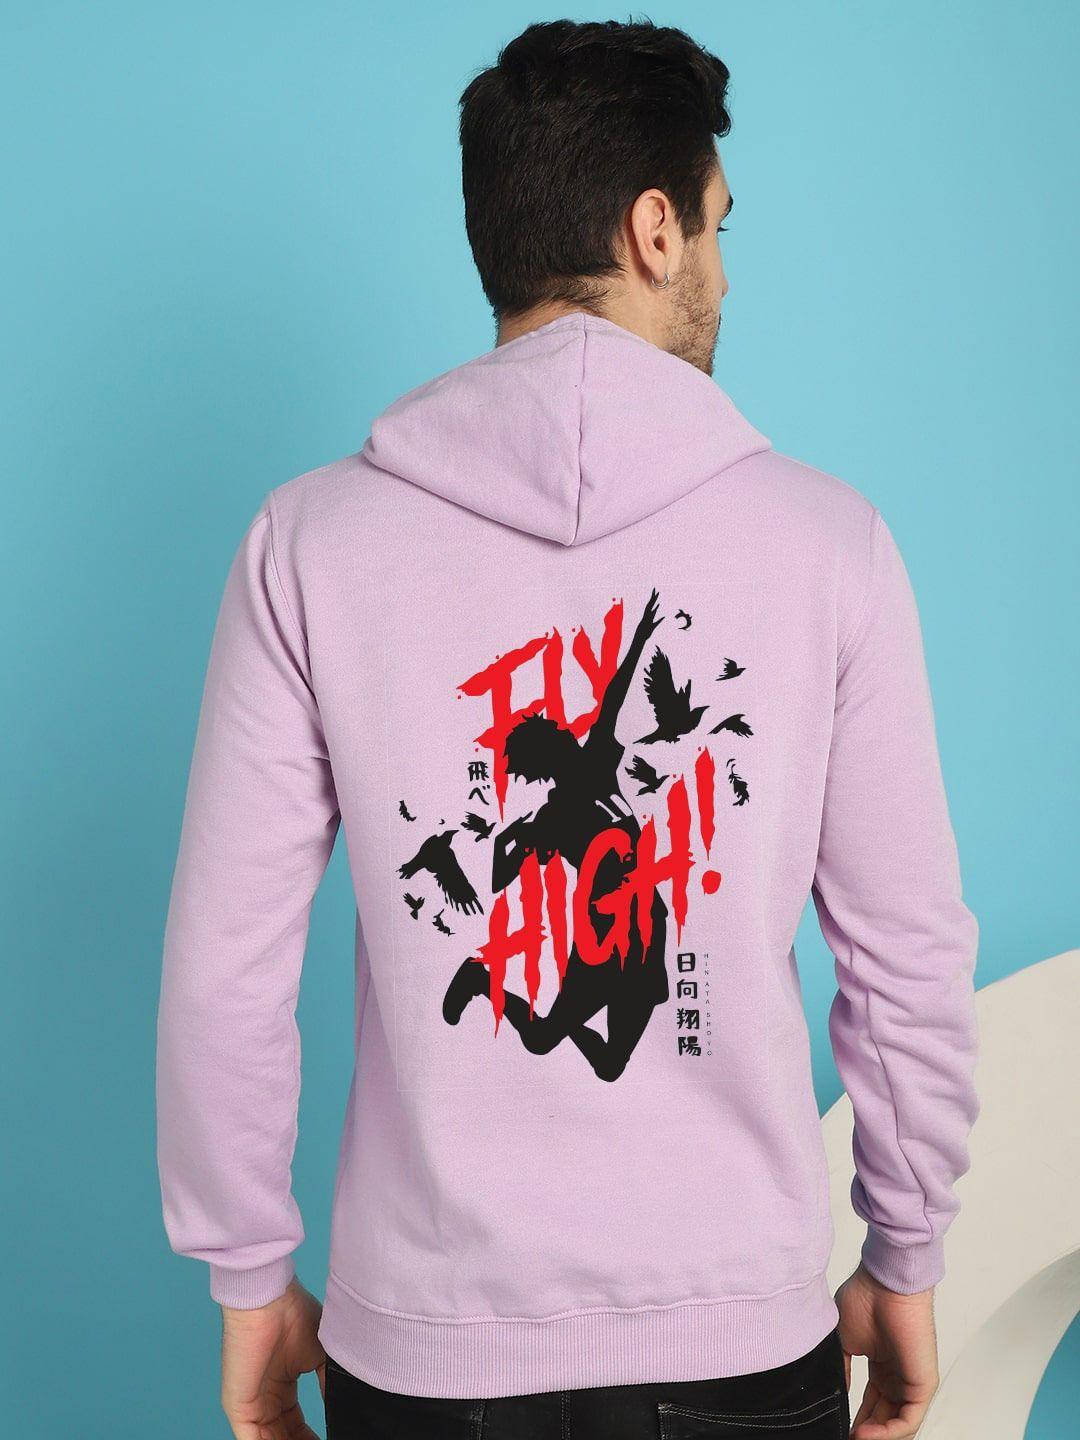 you forever graphic printed hooded fleece pullover sweatshirt